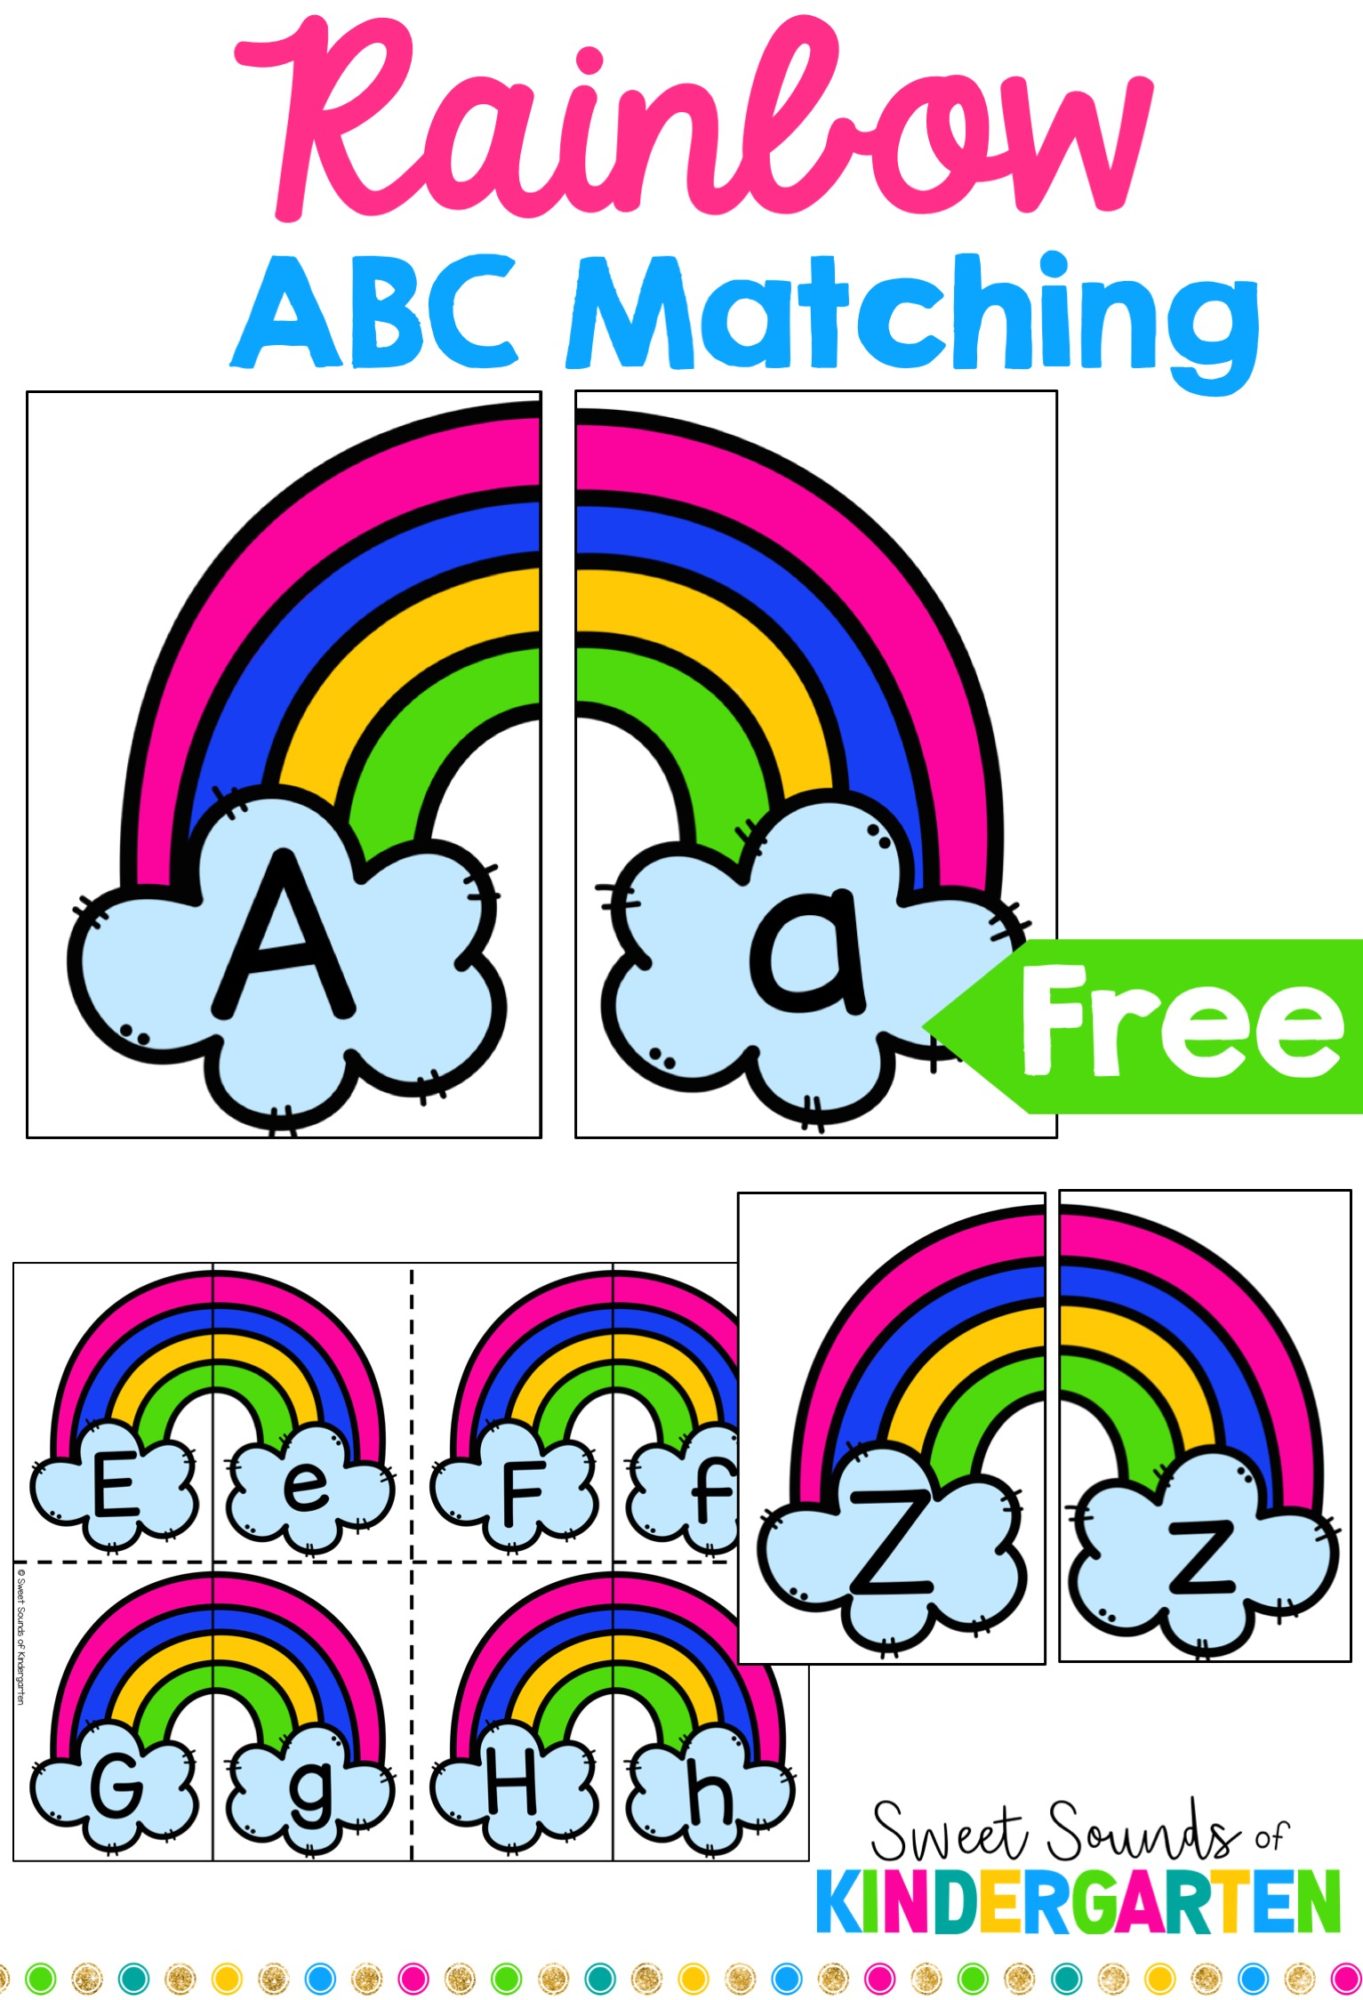 Fun With The Alphabet (A-F) Free Games, Activities